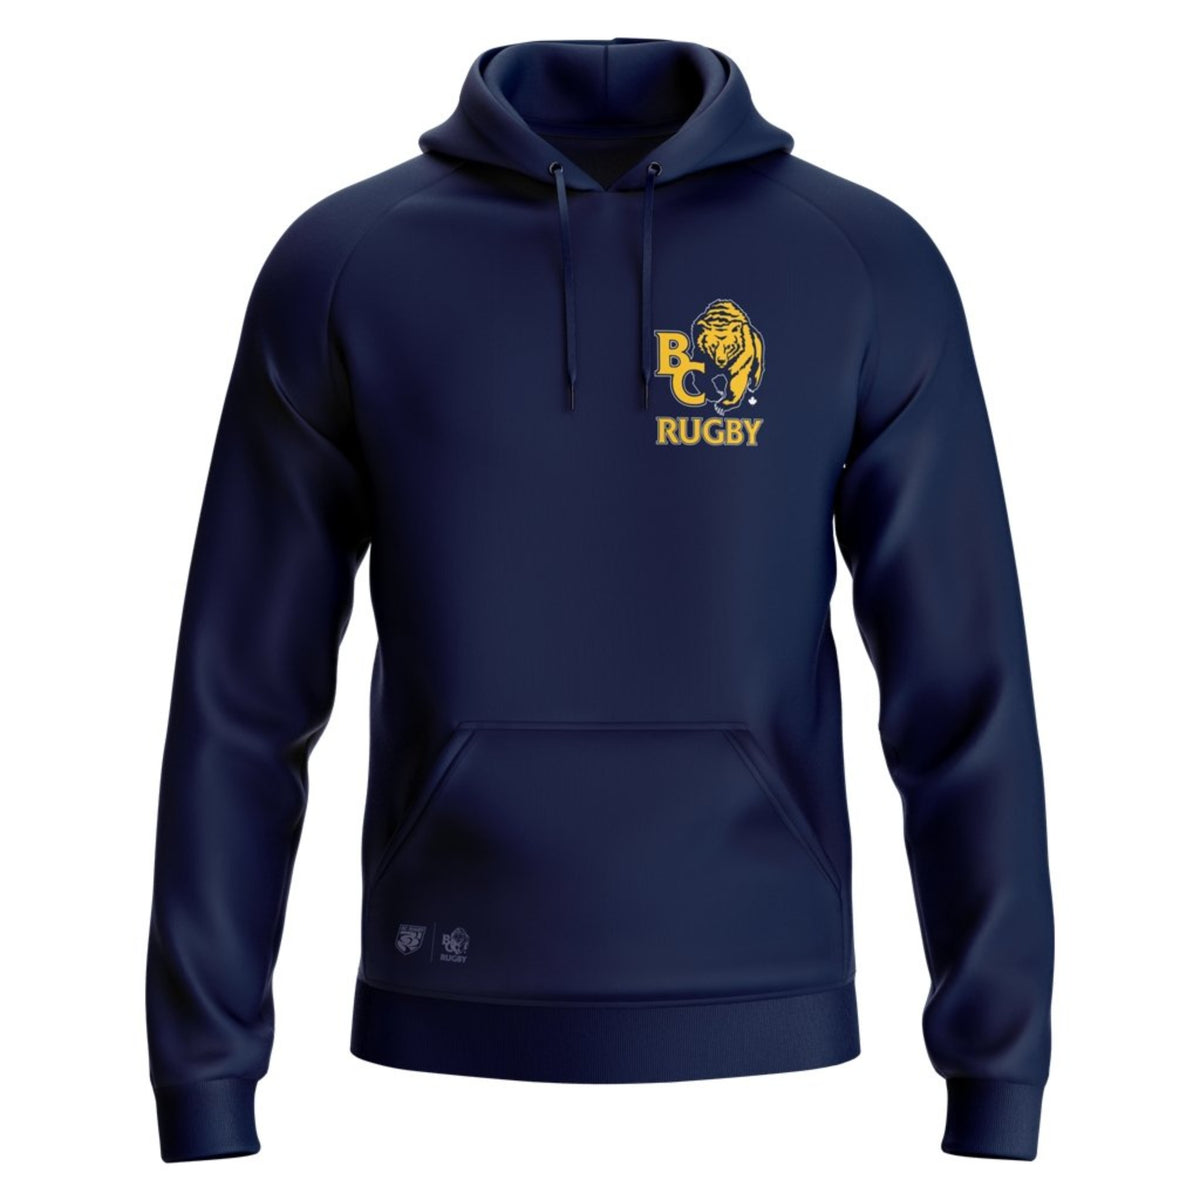 BC Rugby 2021 &quot;Small Logo Team&quot; Hoodie - Youth Unisex - www.therugbyshop.com www.therugbyshop.com YOUTH / NAVY / S XIX Brands HOODIES BC Rugby 2021 &quot;Small Logo Team&quot; Hoodie - Youth Unisex